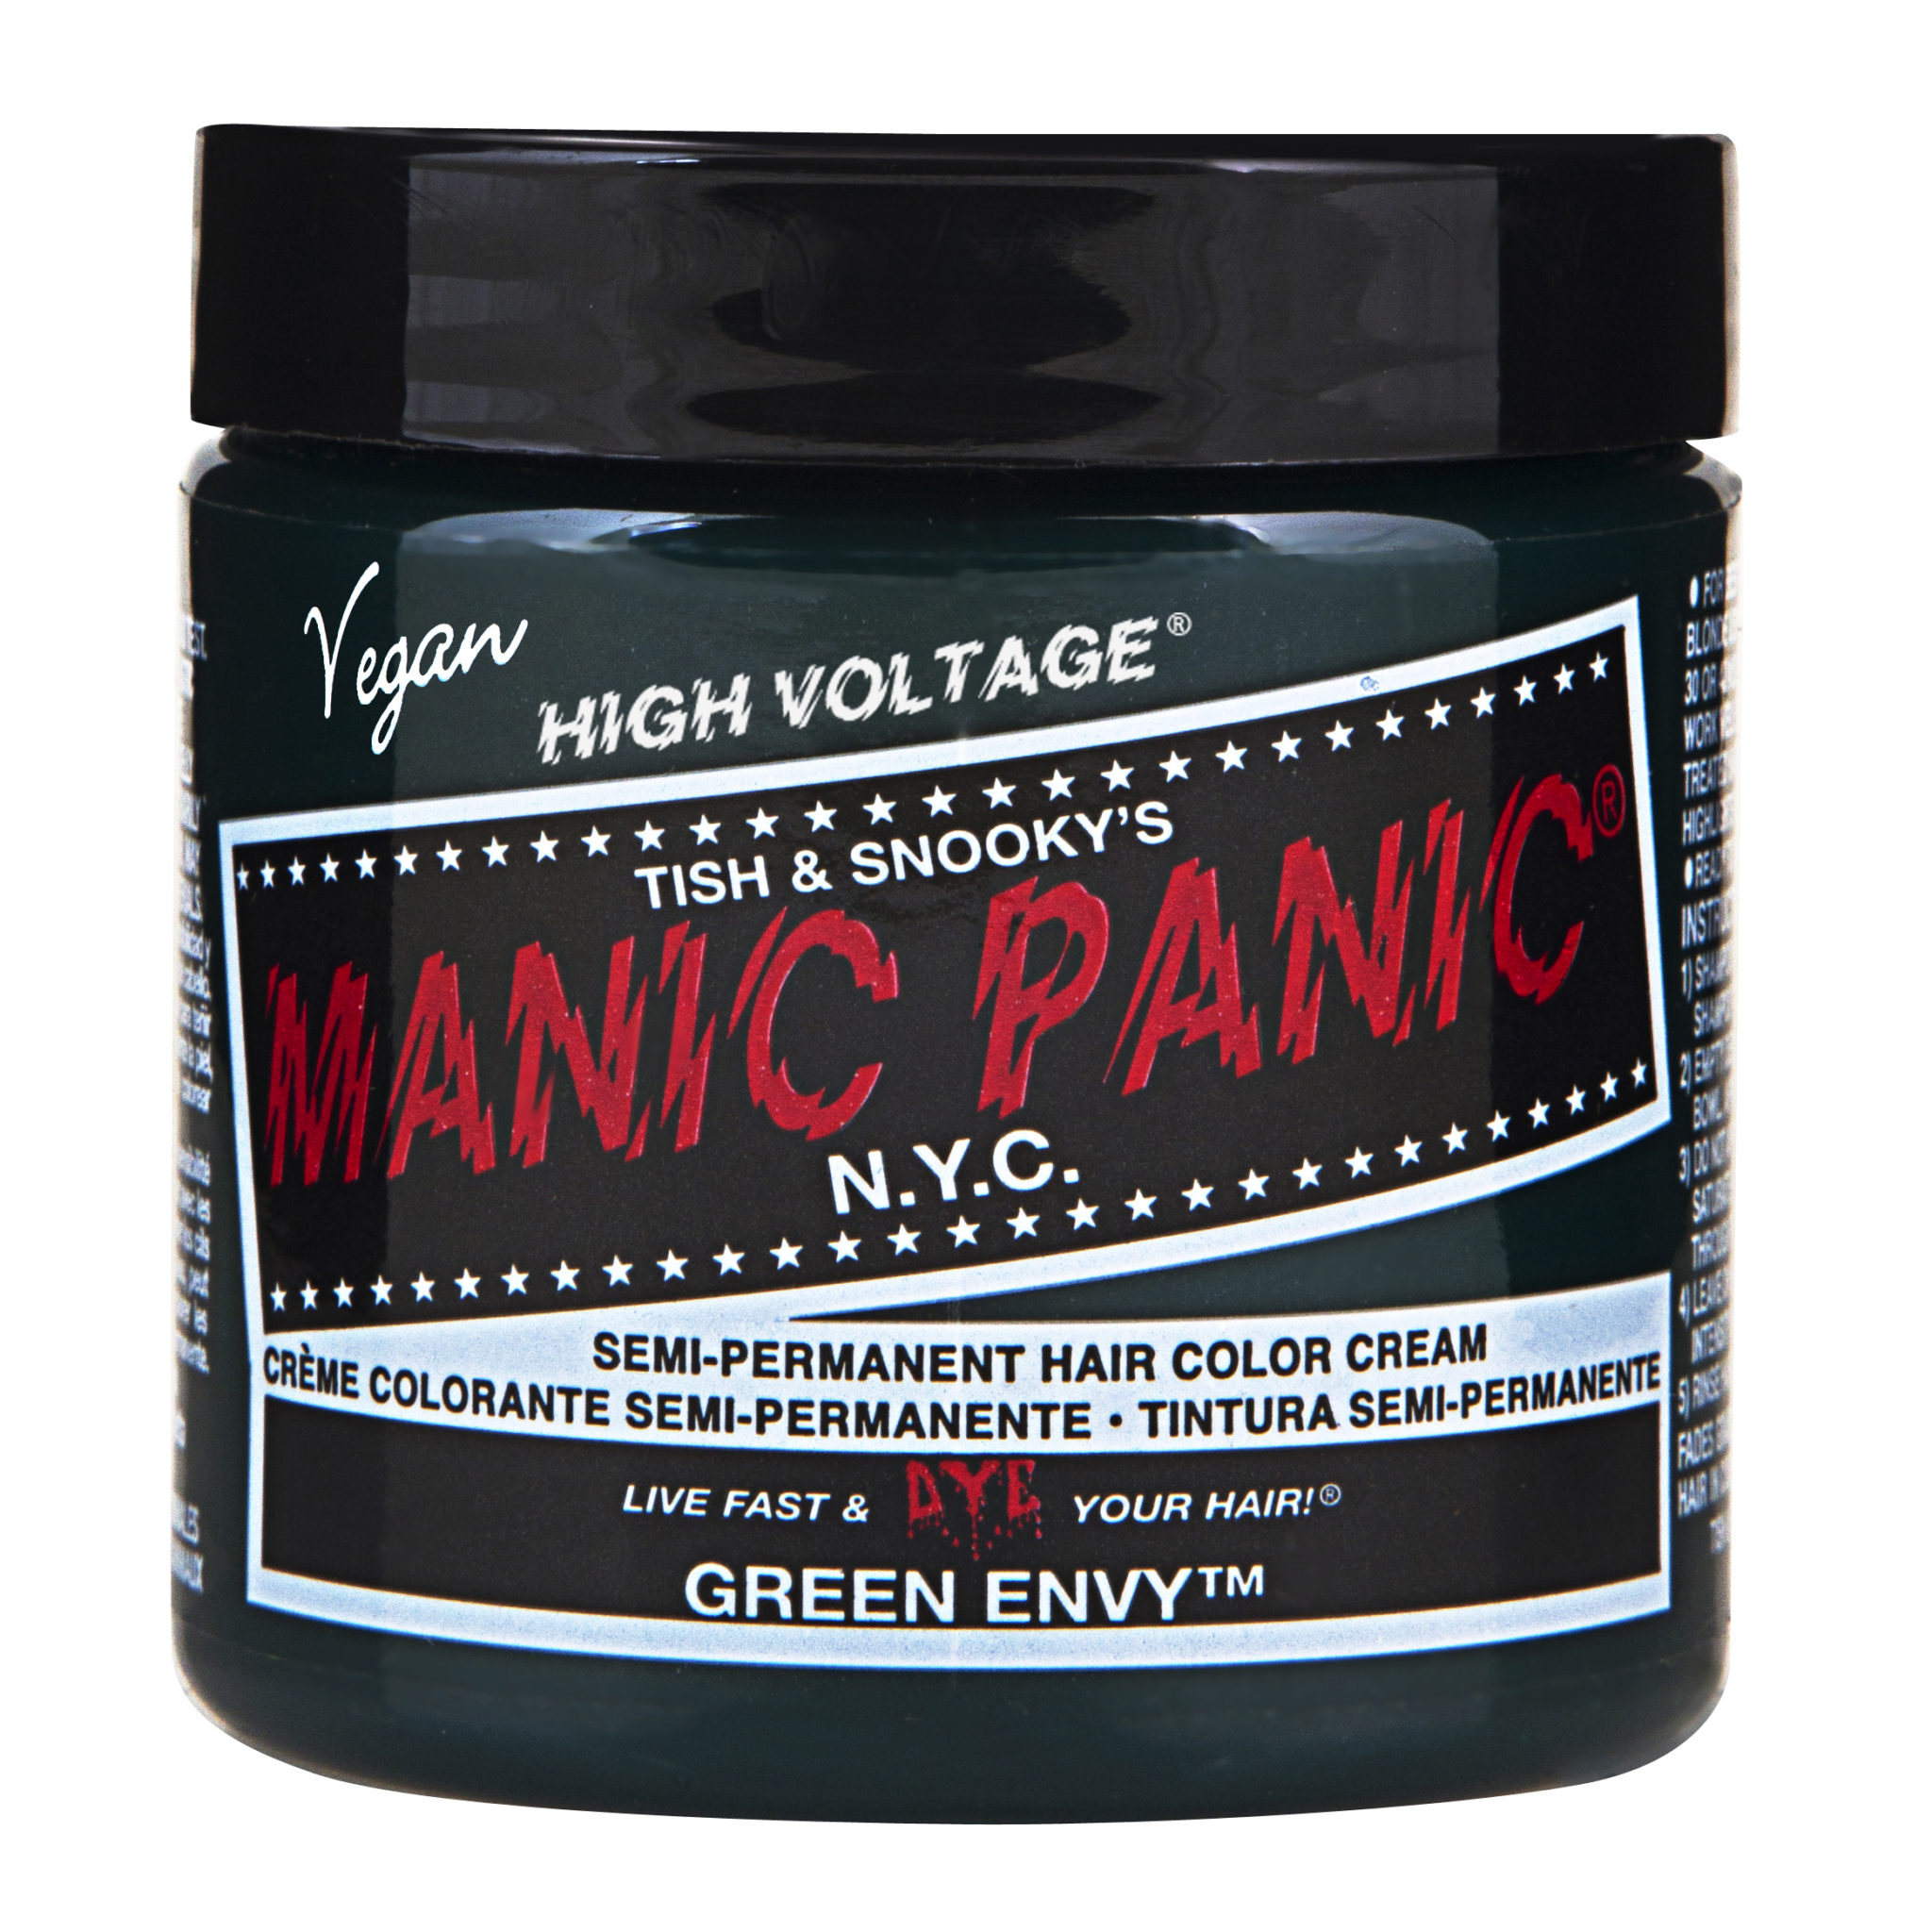 Manic Panic Green Envy Classic - Hair products New Zealand | Nation wide  hairdressing & hair care group